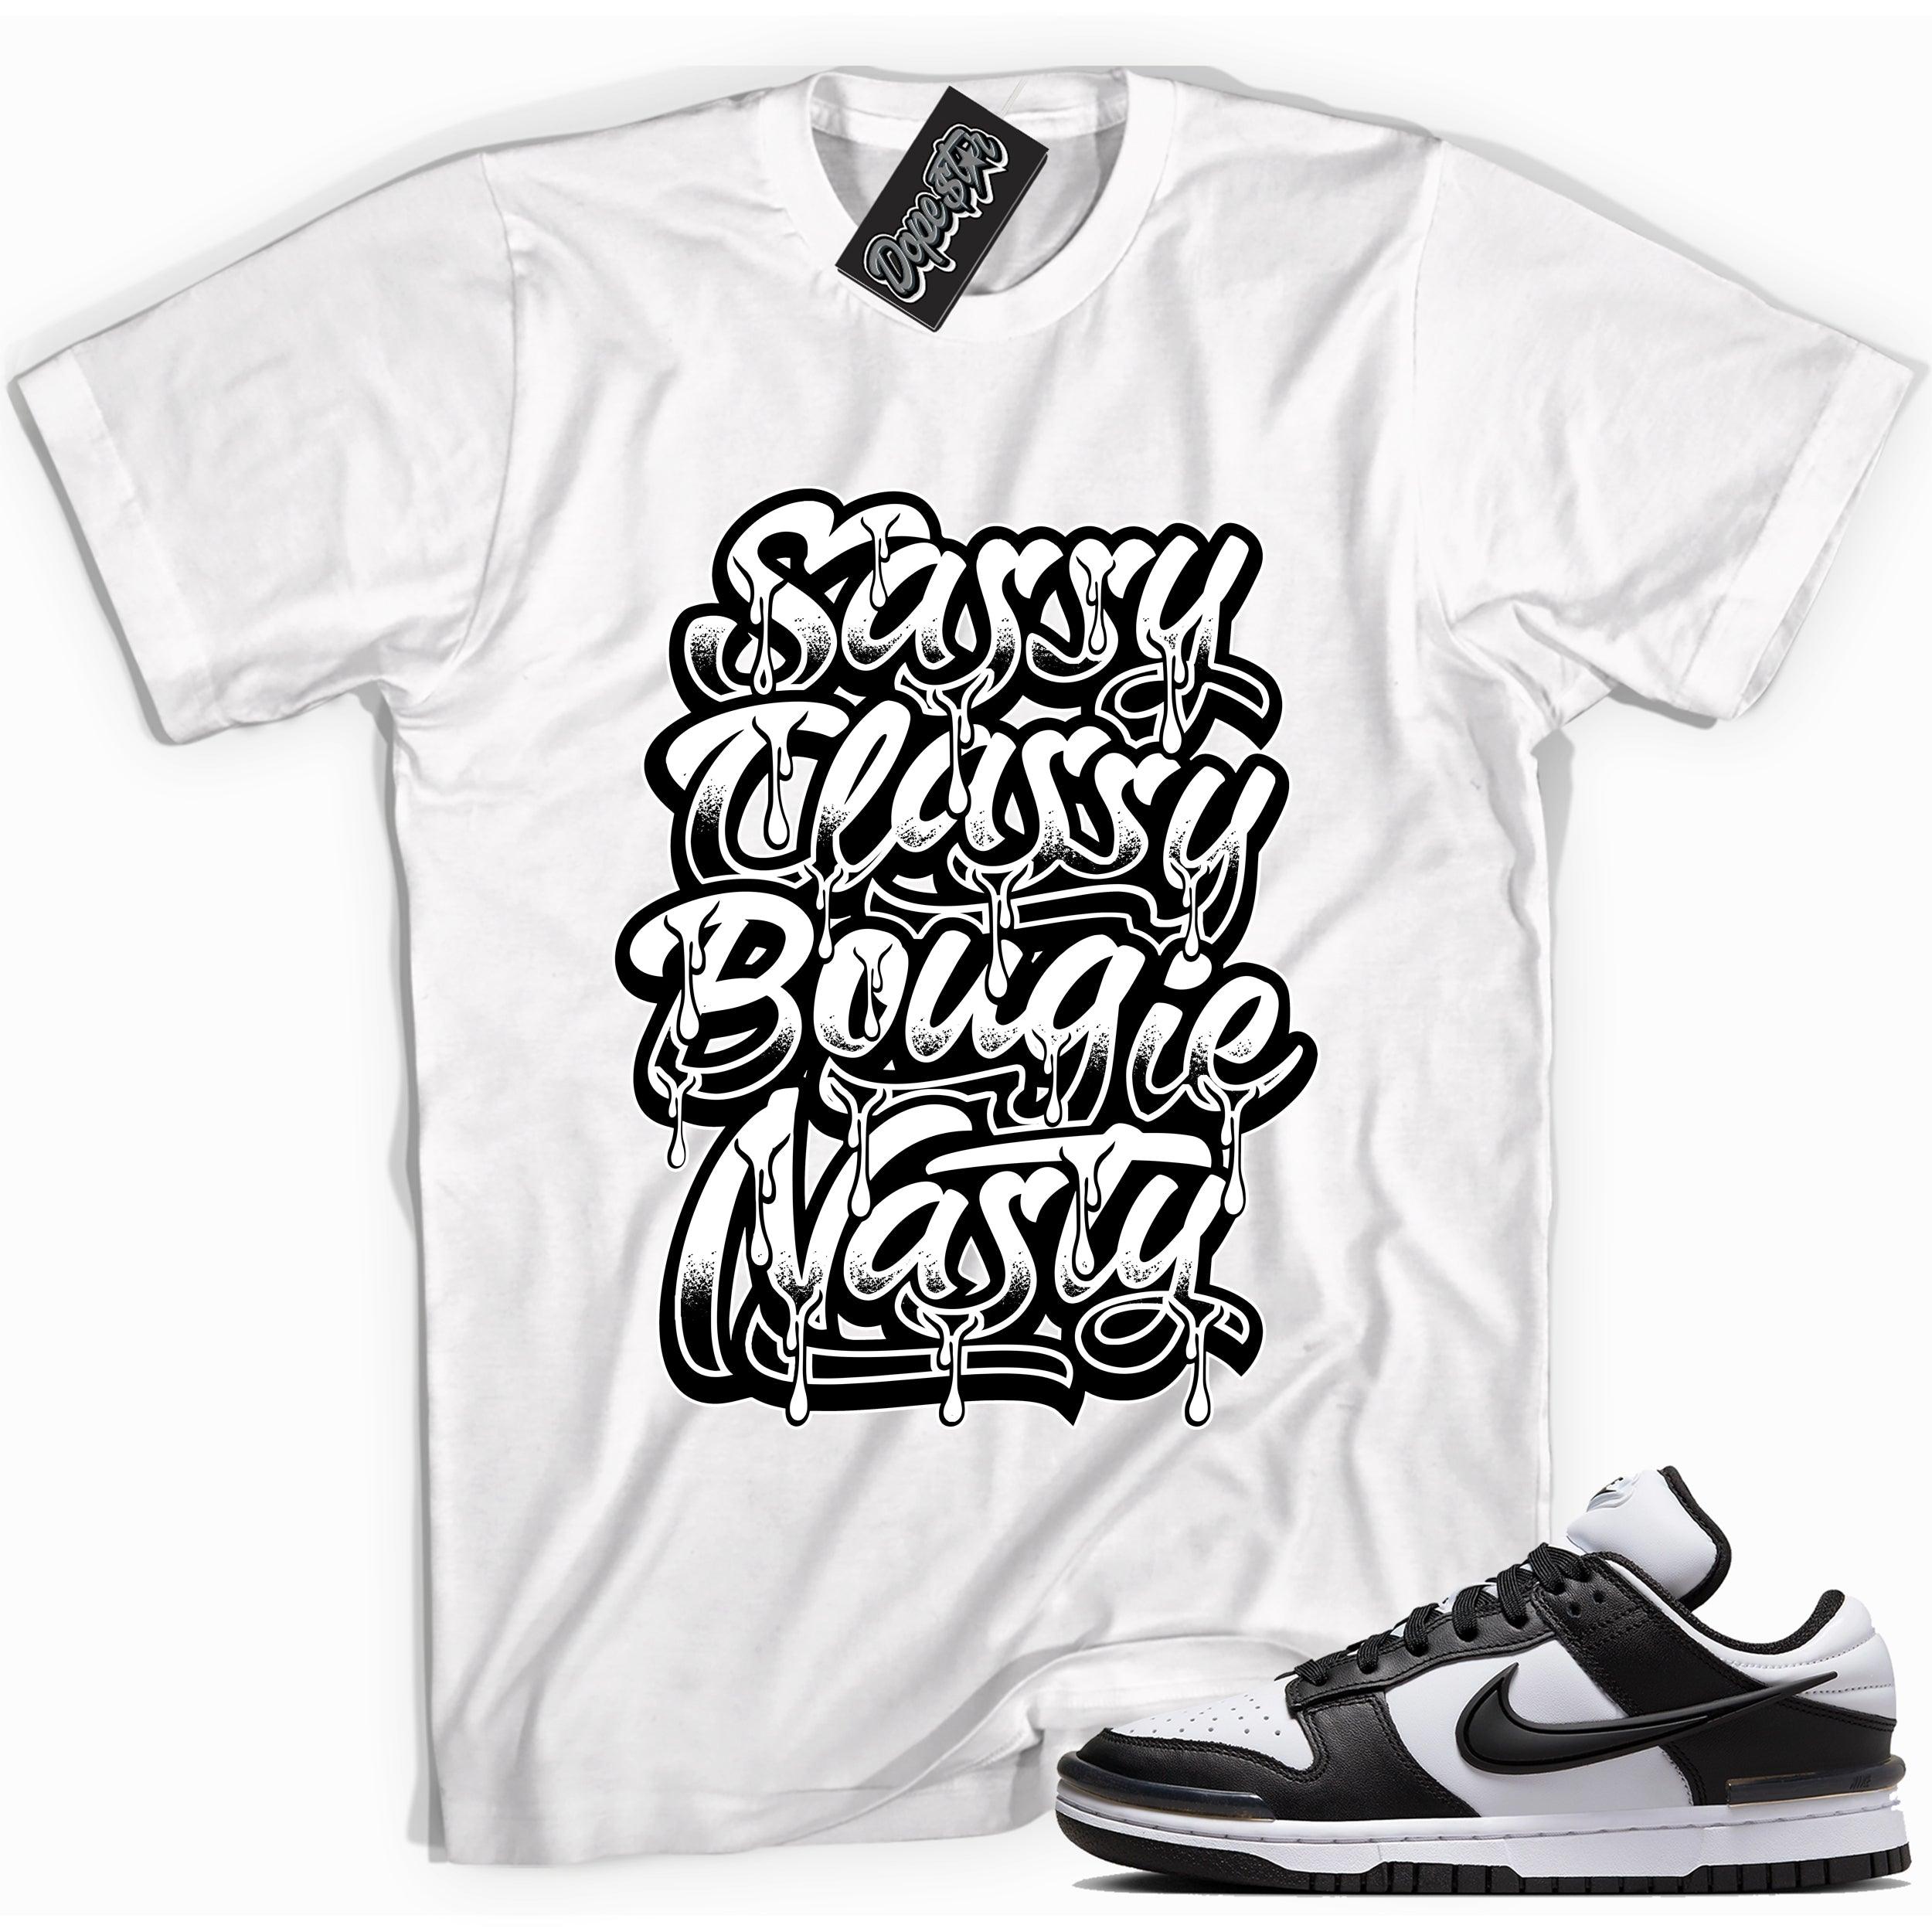 Cool white graphic tee with 'sassy classy' print, that perfectly matches Nike Dunk Low Twist Panda sneakers.